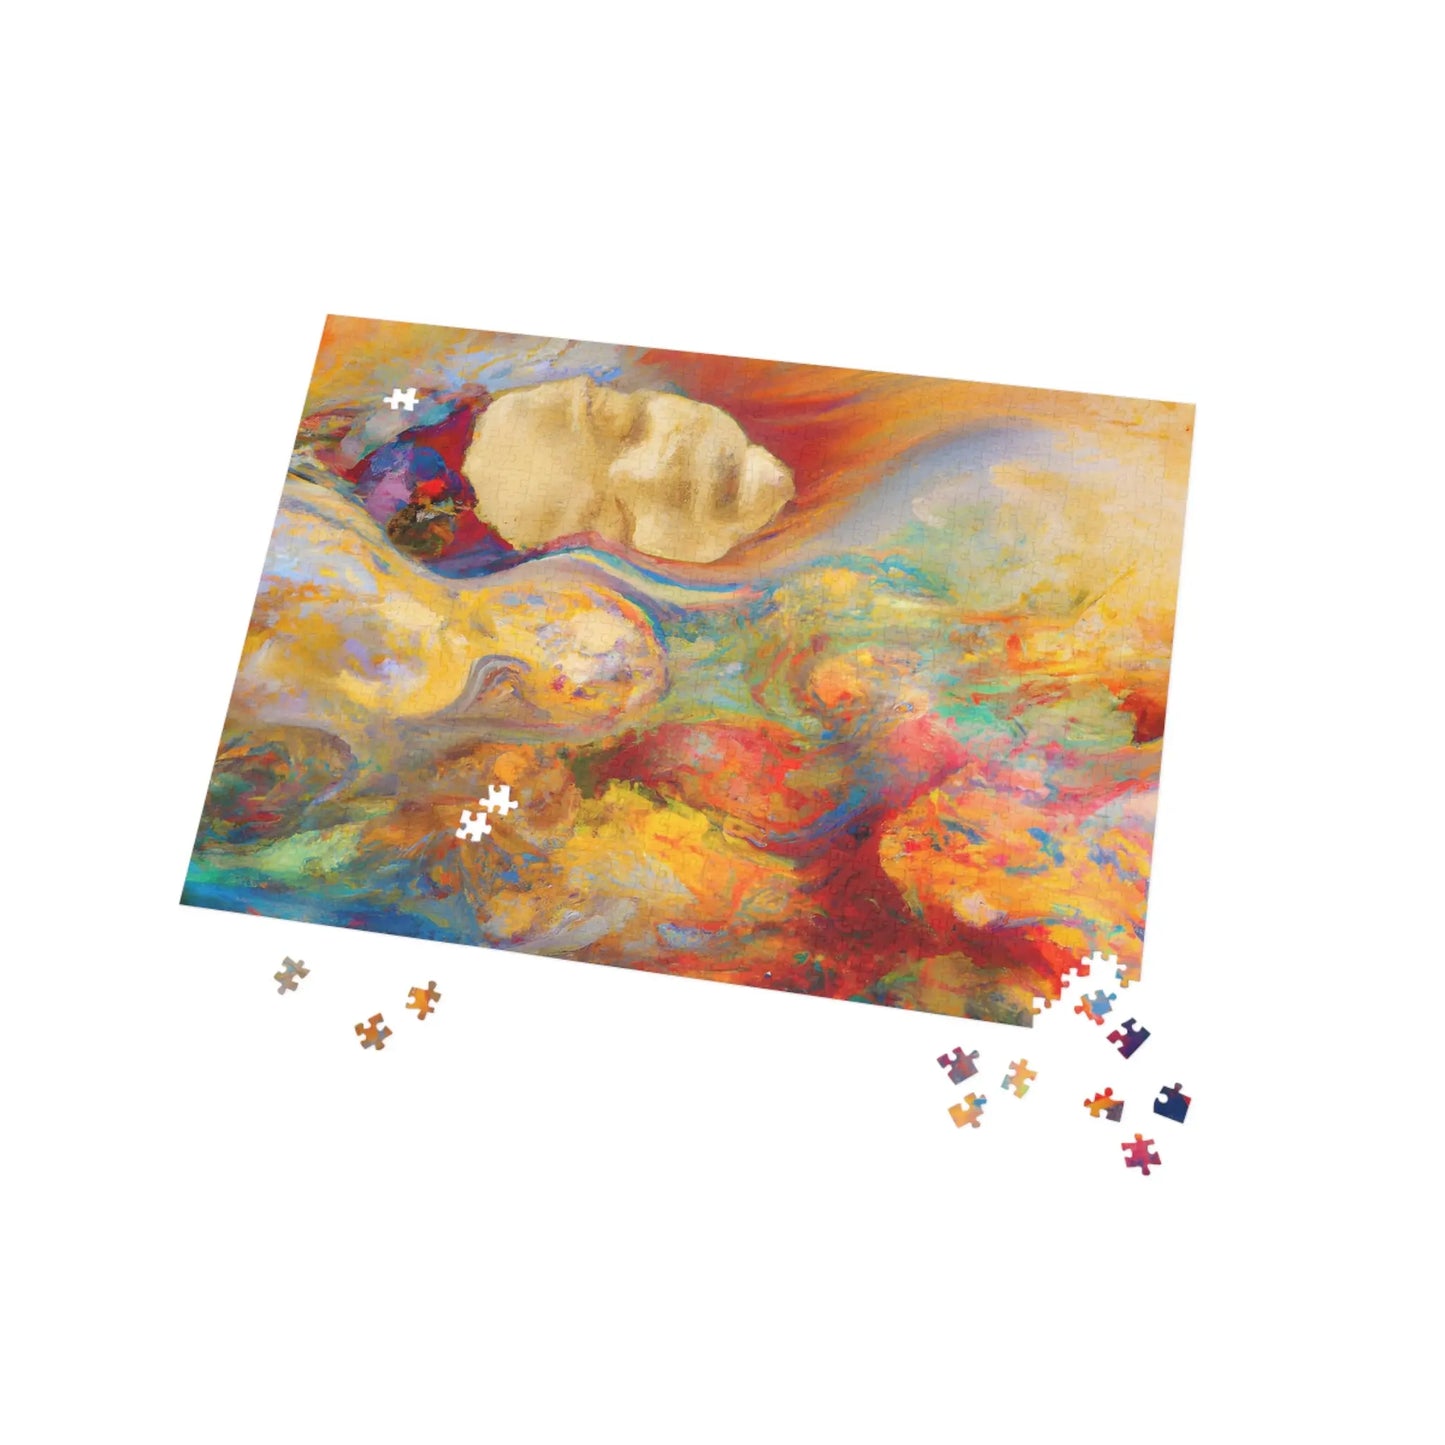 MallowMaster - Autism Jigsaw Puzzle